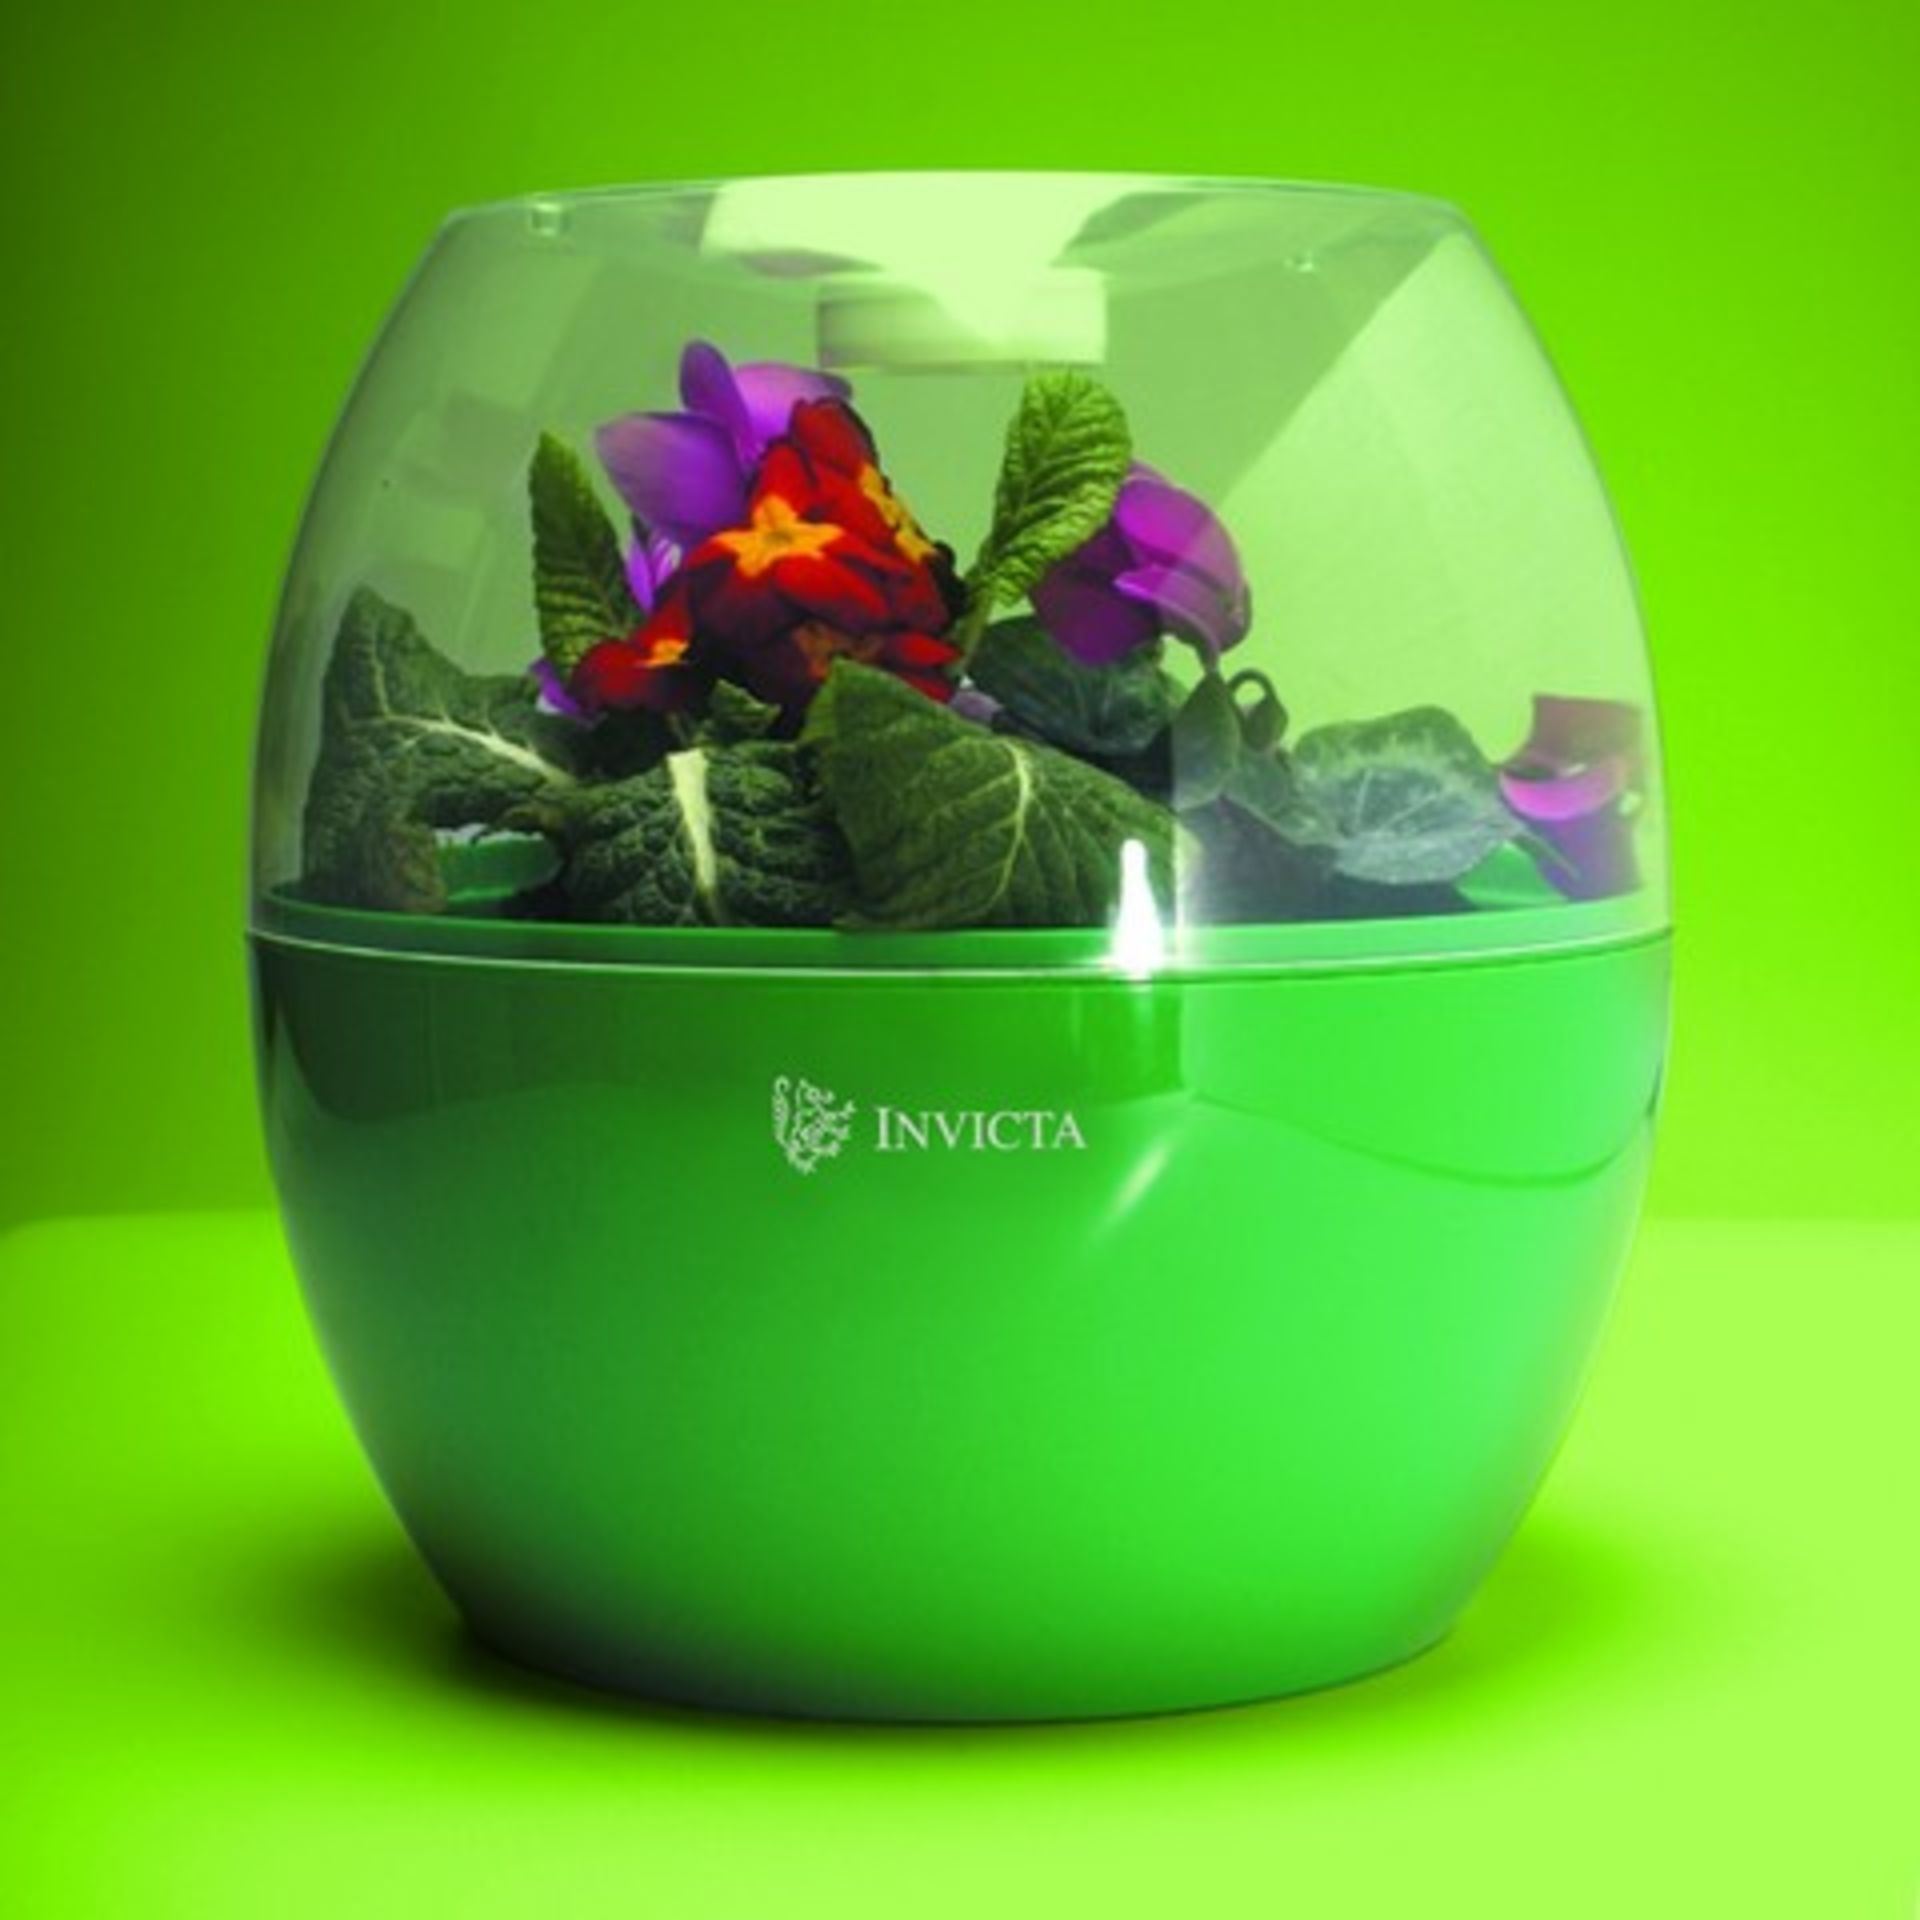 V Brand New Invicta Grow Bell ISP £15.99 (Supplies For Schools)